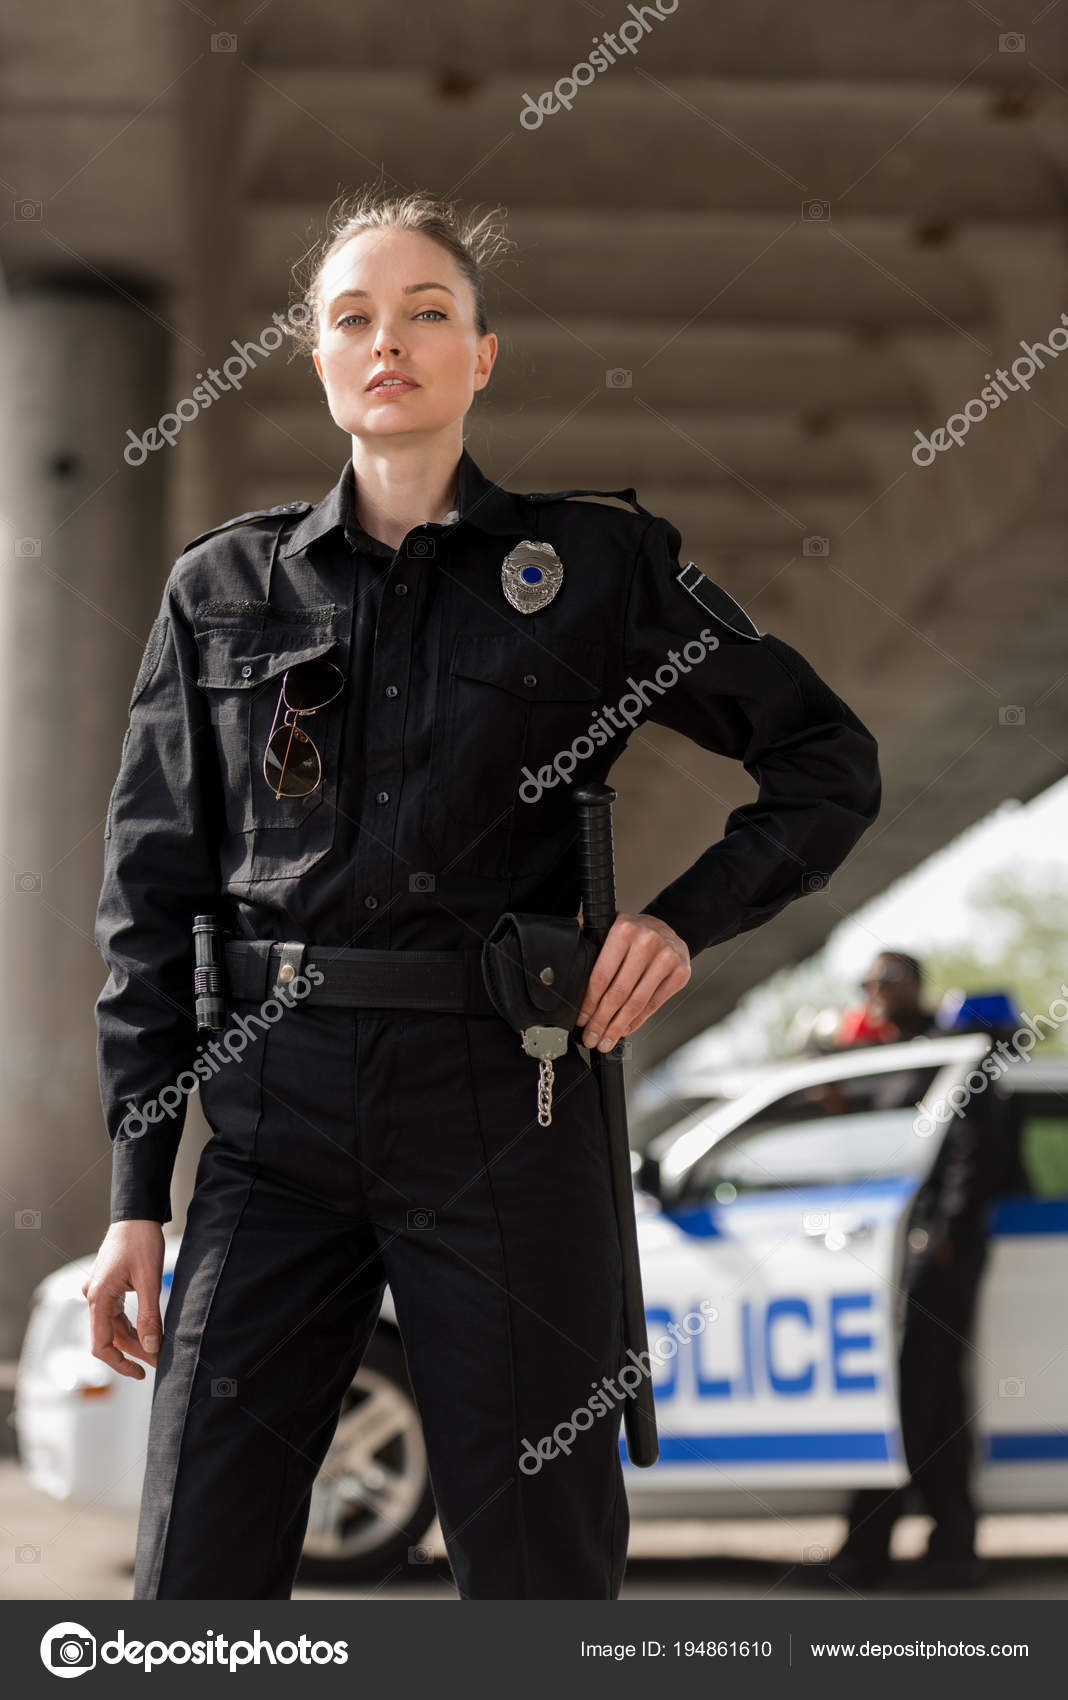 Are joke police a officers female In the